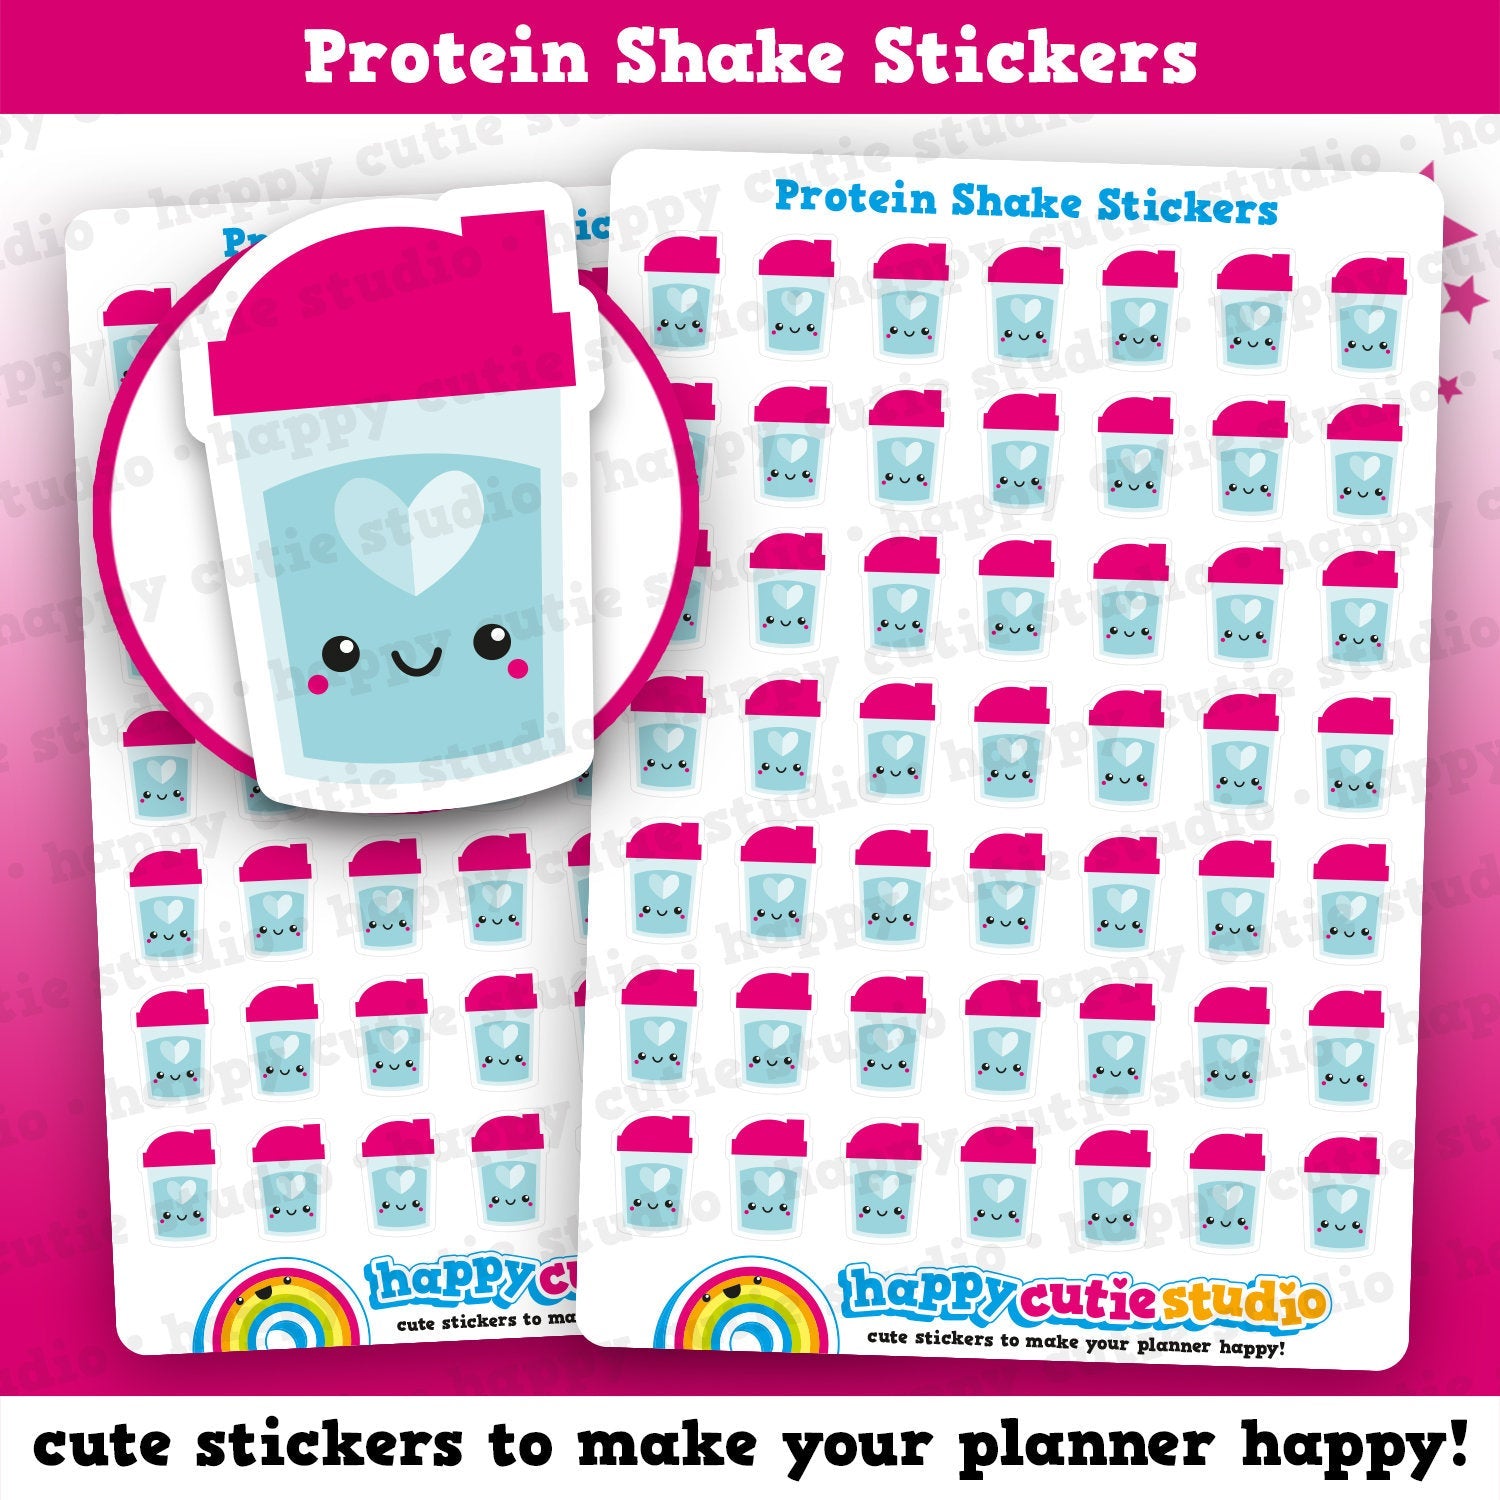 49 Cute Protein Shake Planner Stickers